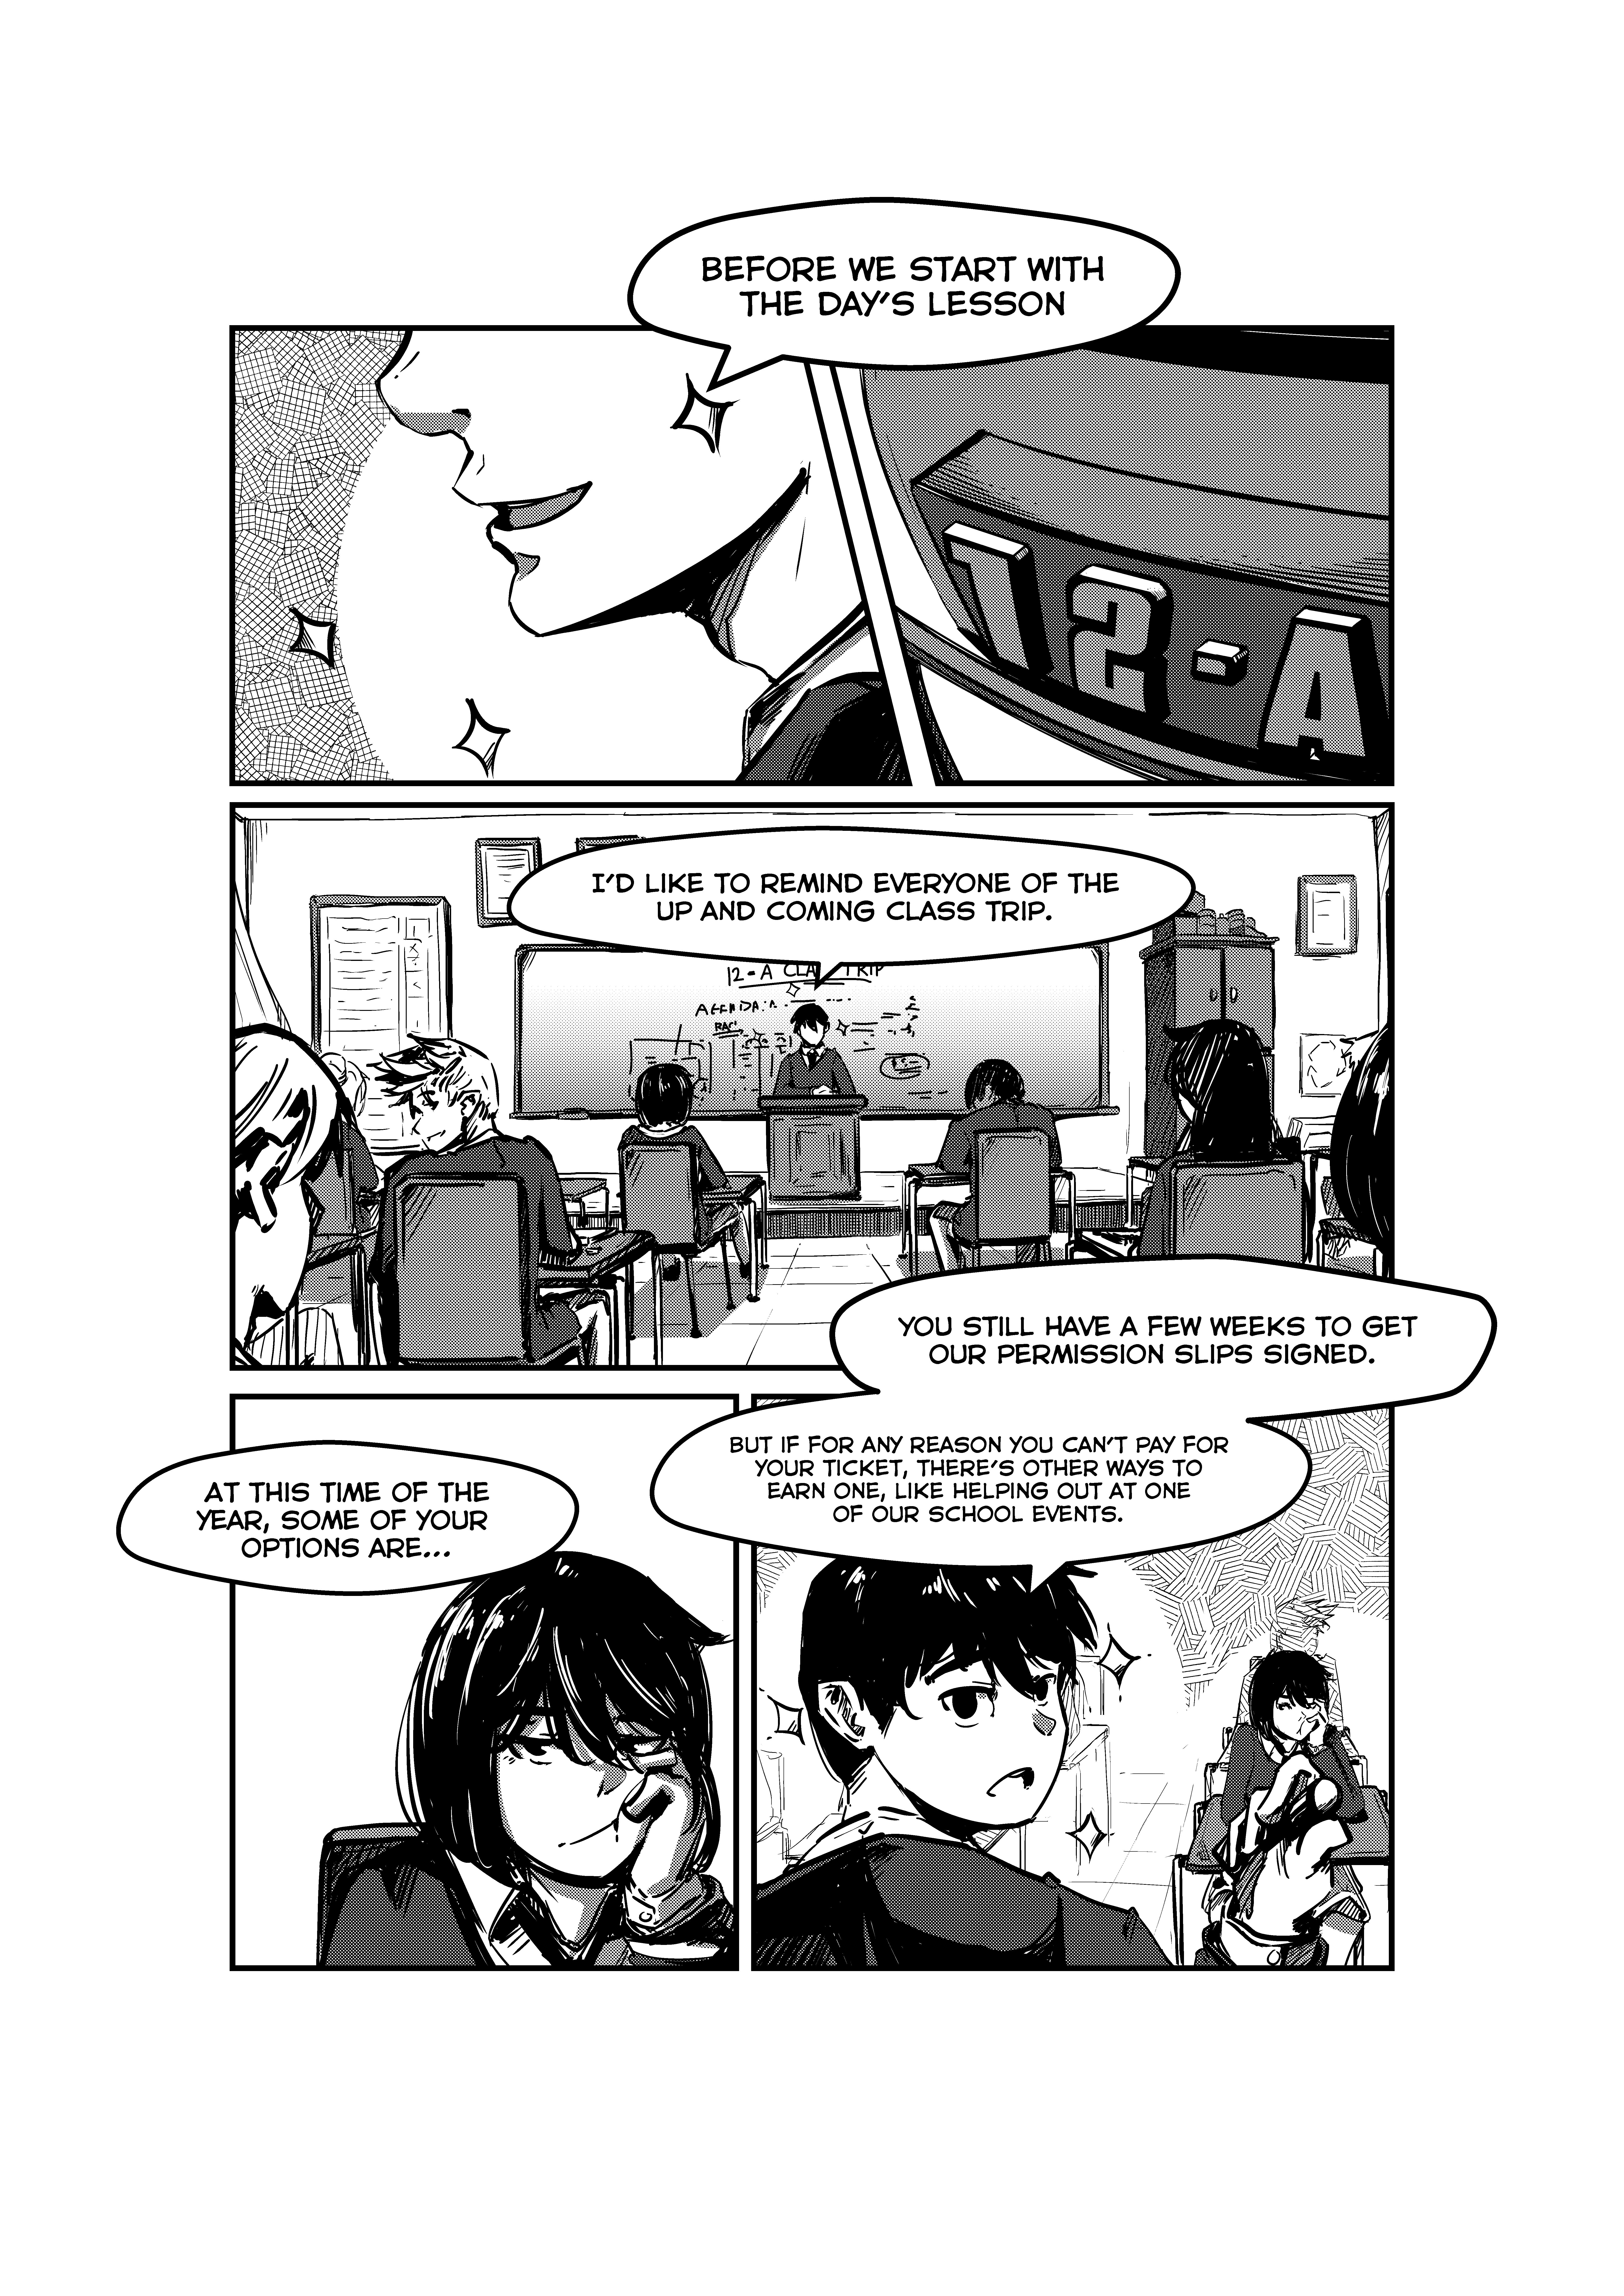 Opposites In Disguise - 11 page 2